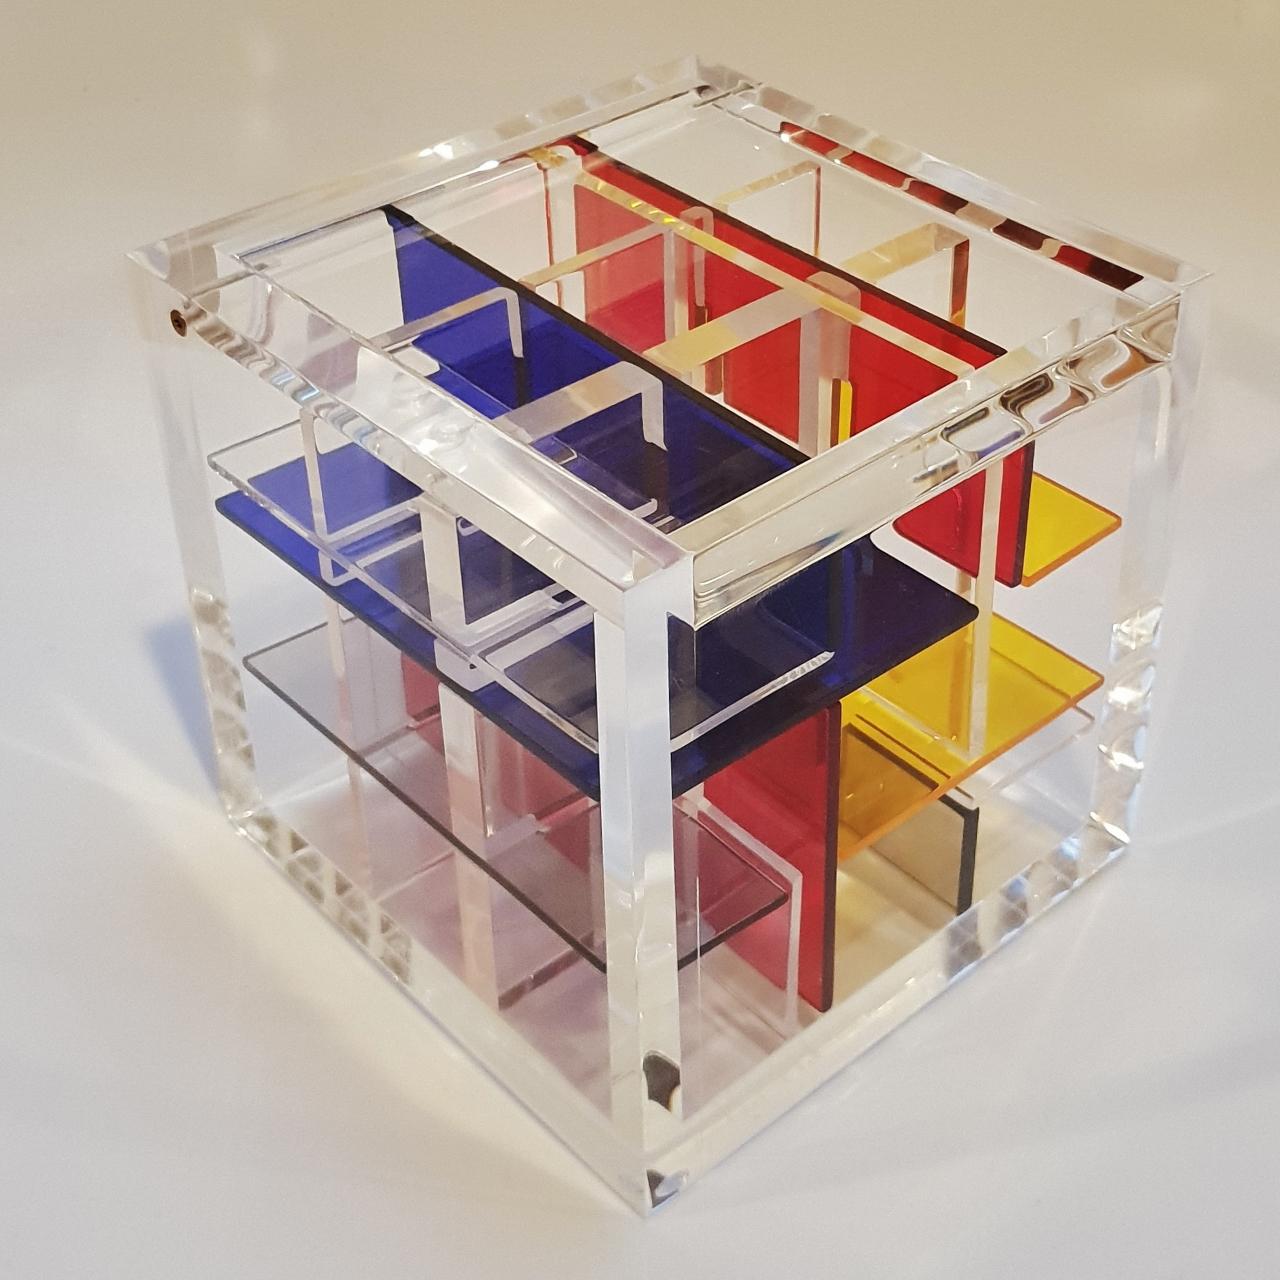 Homage to De Stijl - contemporary modern abstract geometric cube sculpture - Abstract Geometric Sculpture by Haringa + Olijve